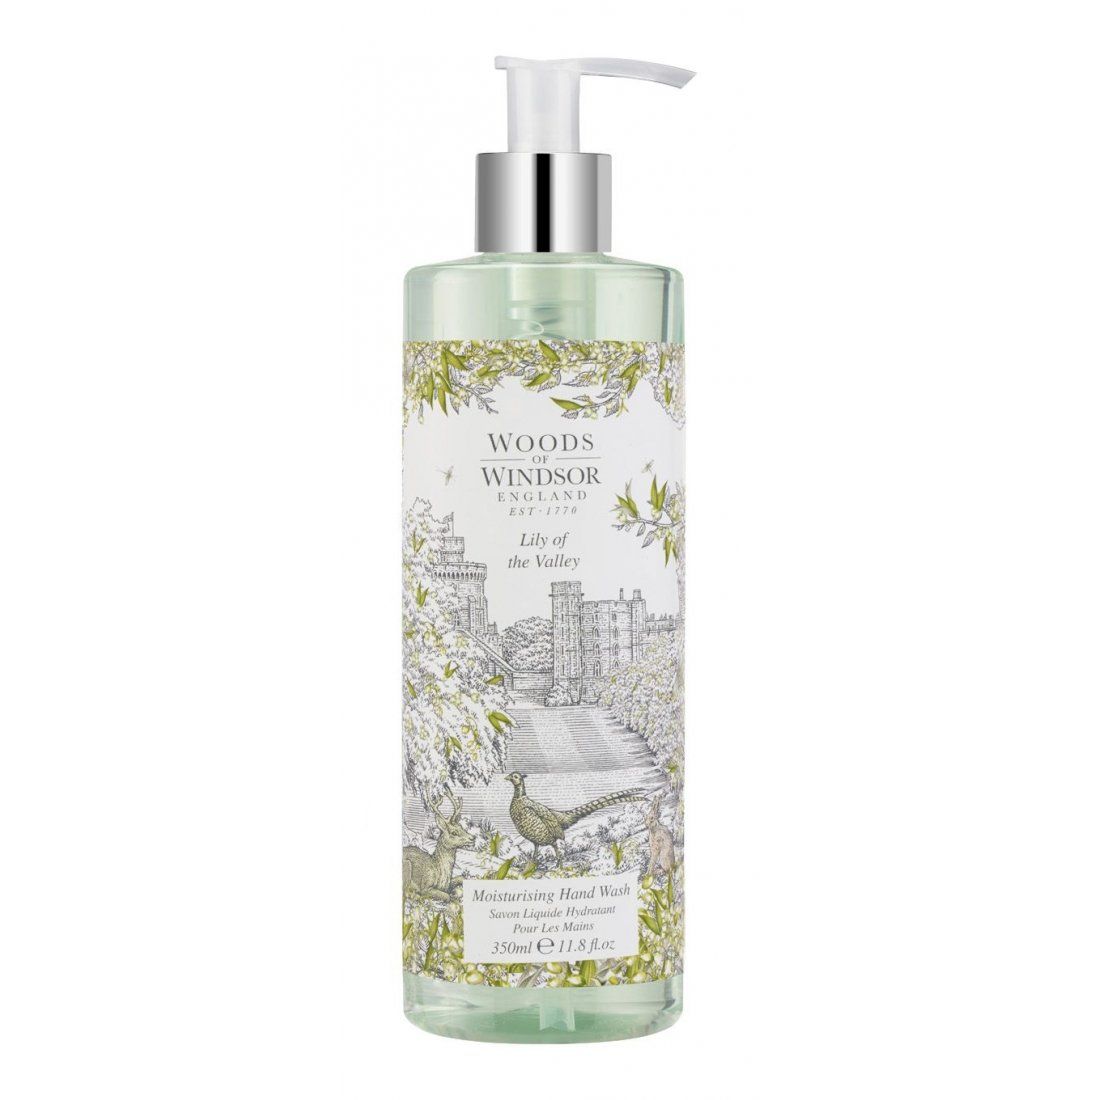 Woods of Windsor - Savon liquide pour les mains 'Lily of the Valley' - 350 ml